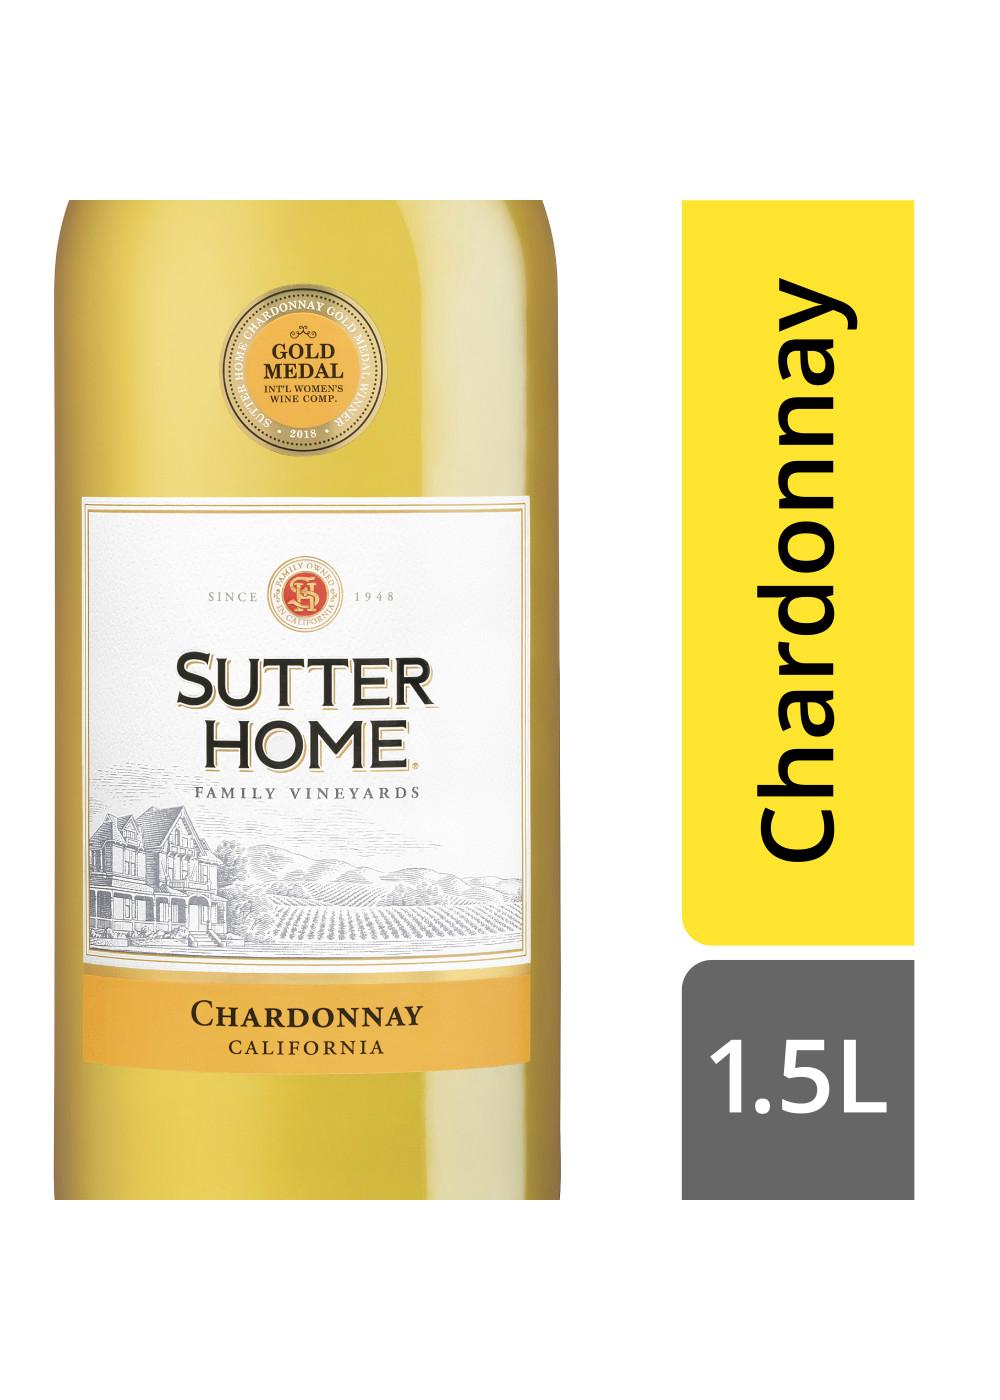 Sutter Home Family Vineyards Chardonnay Wine; image 2 of 4